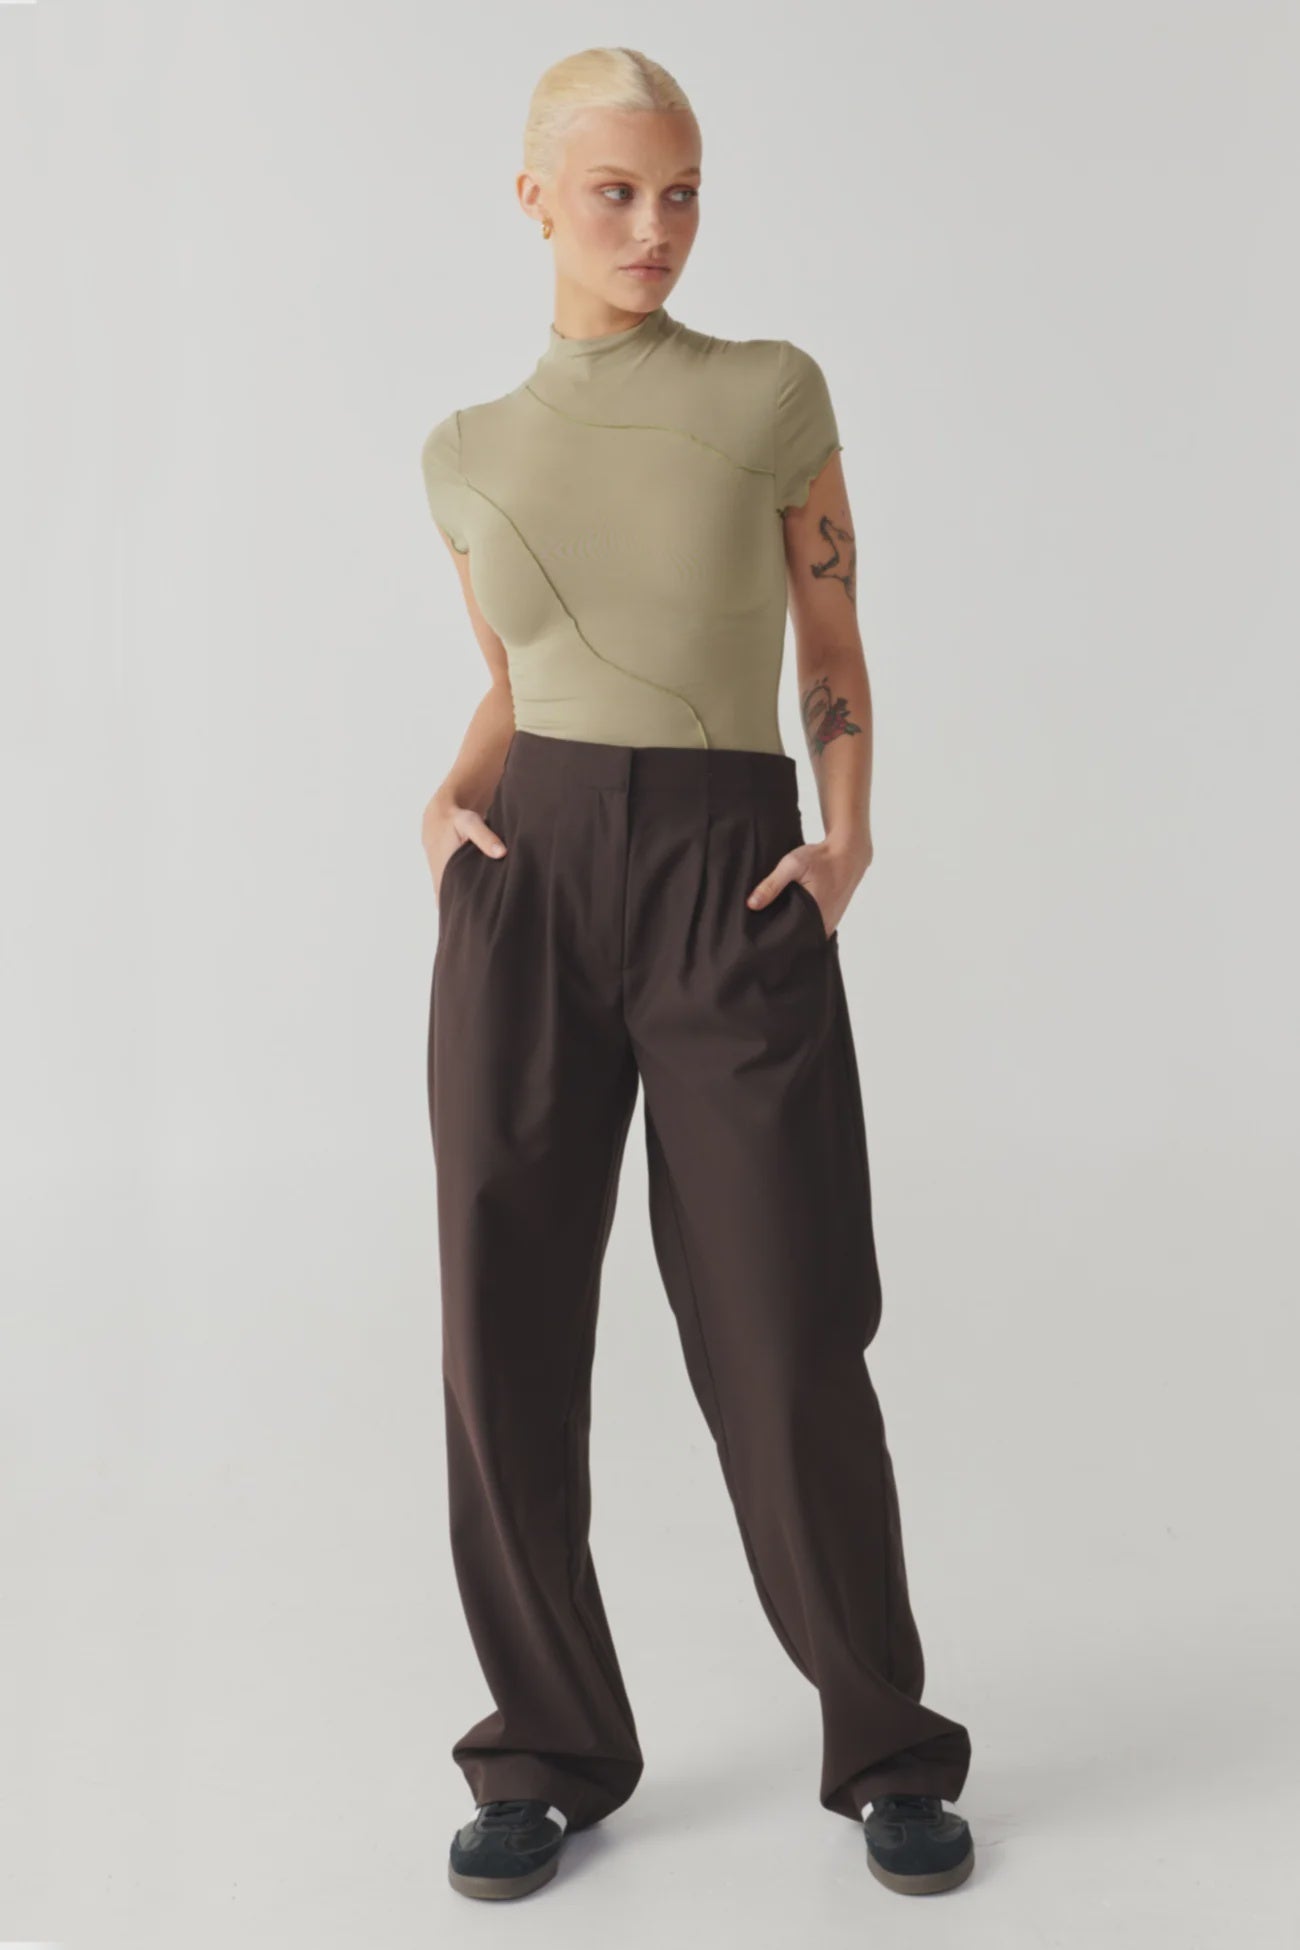 RAEF THE LABEL - ASHER WIDE LEG PANT - ESPRESSO